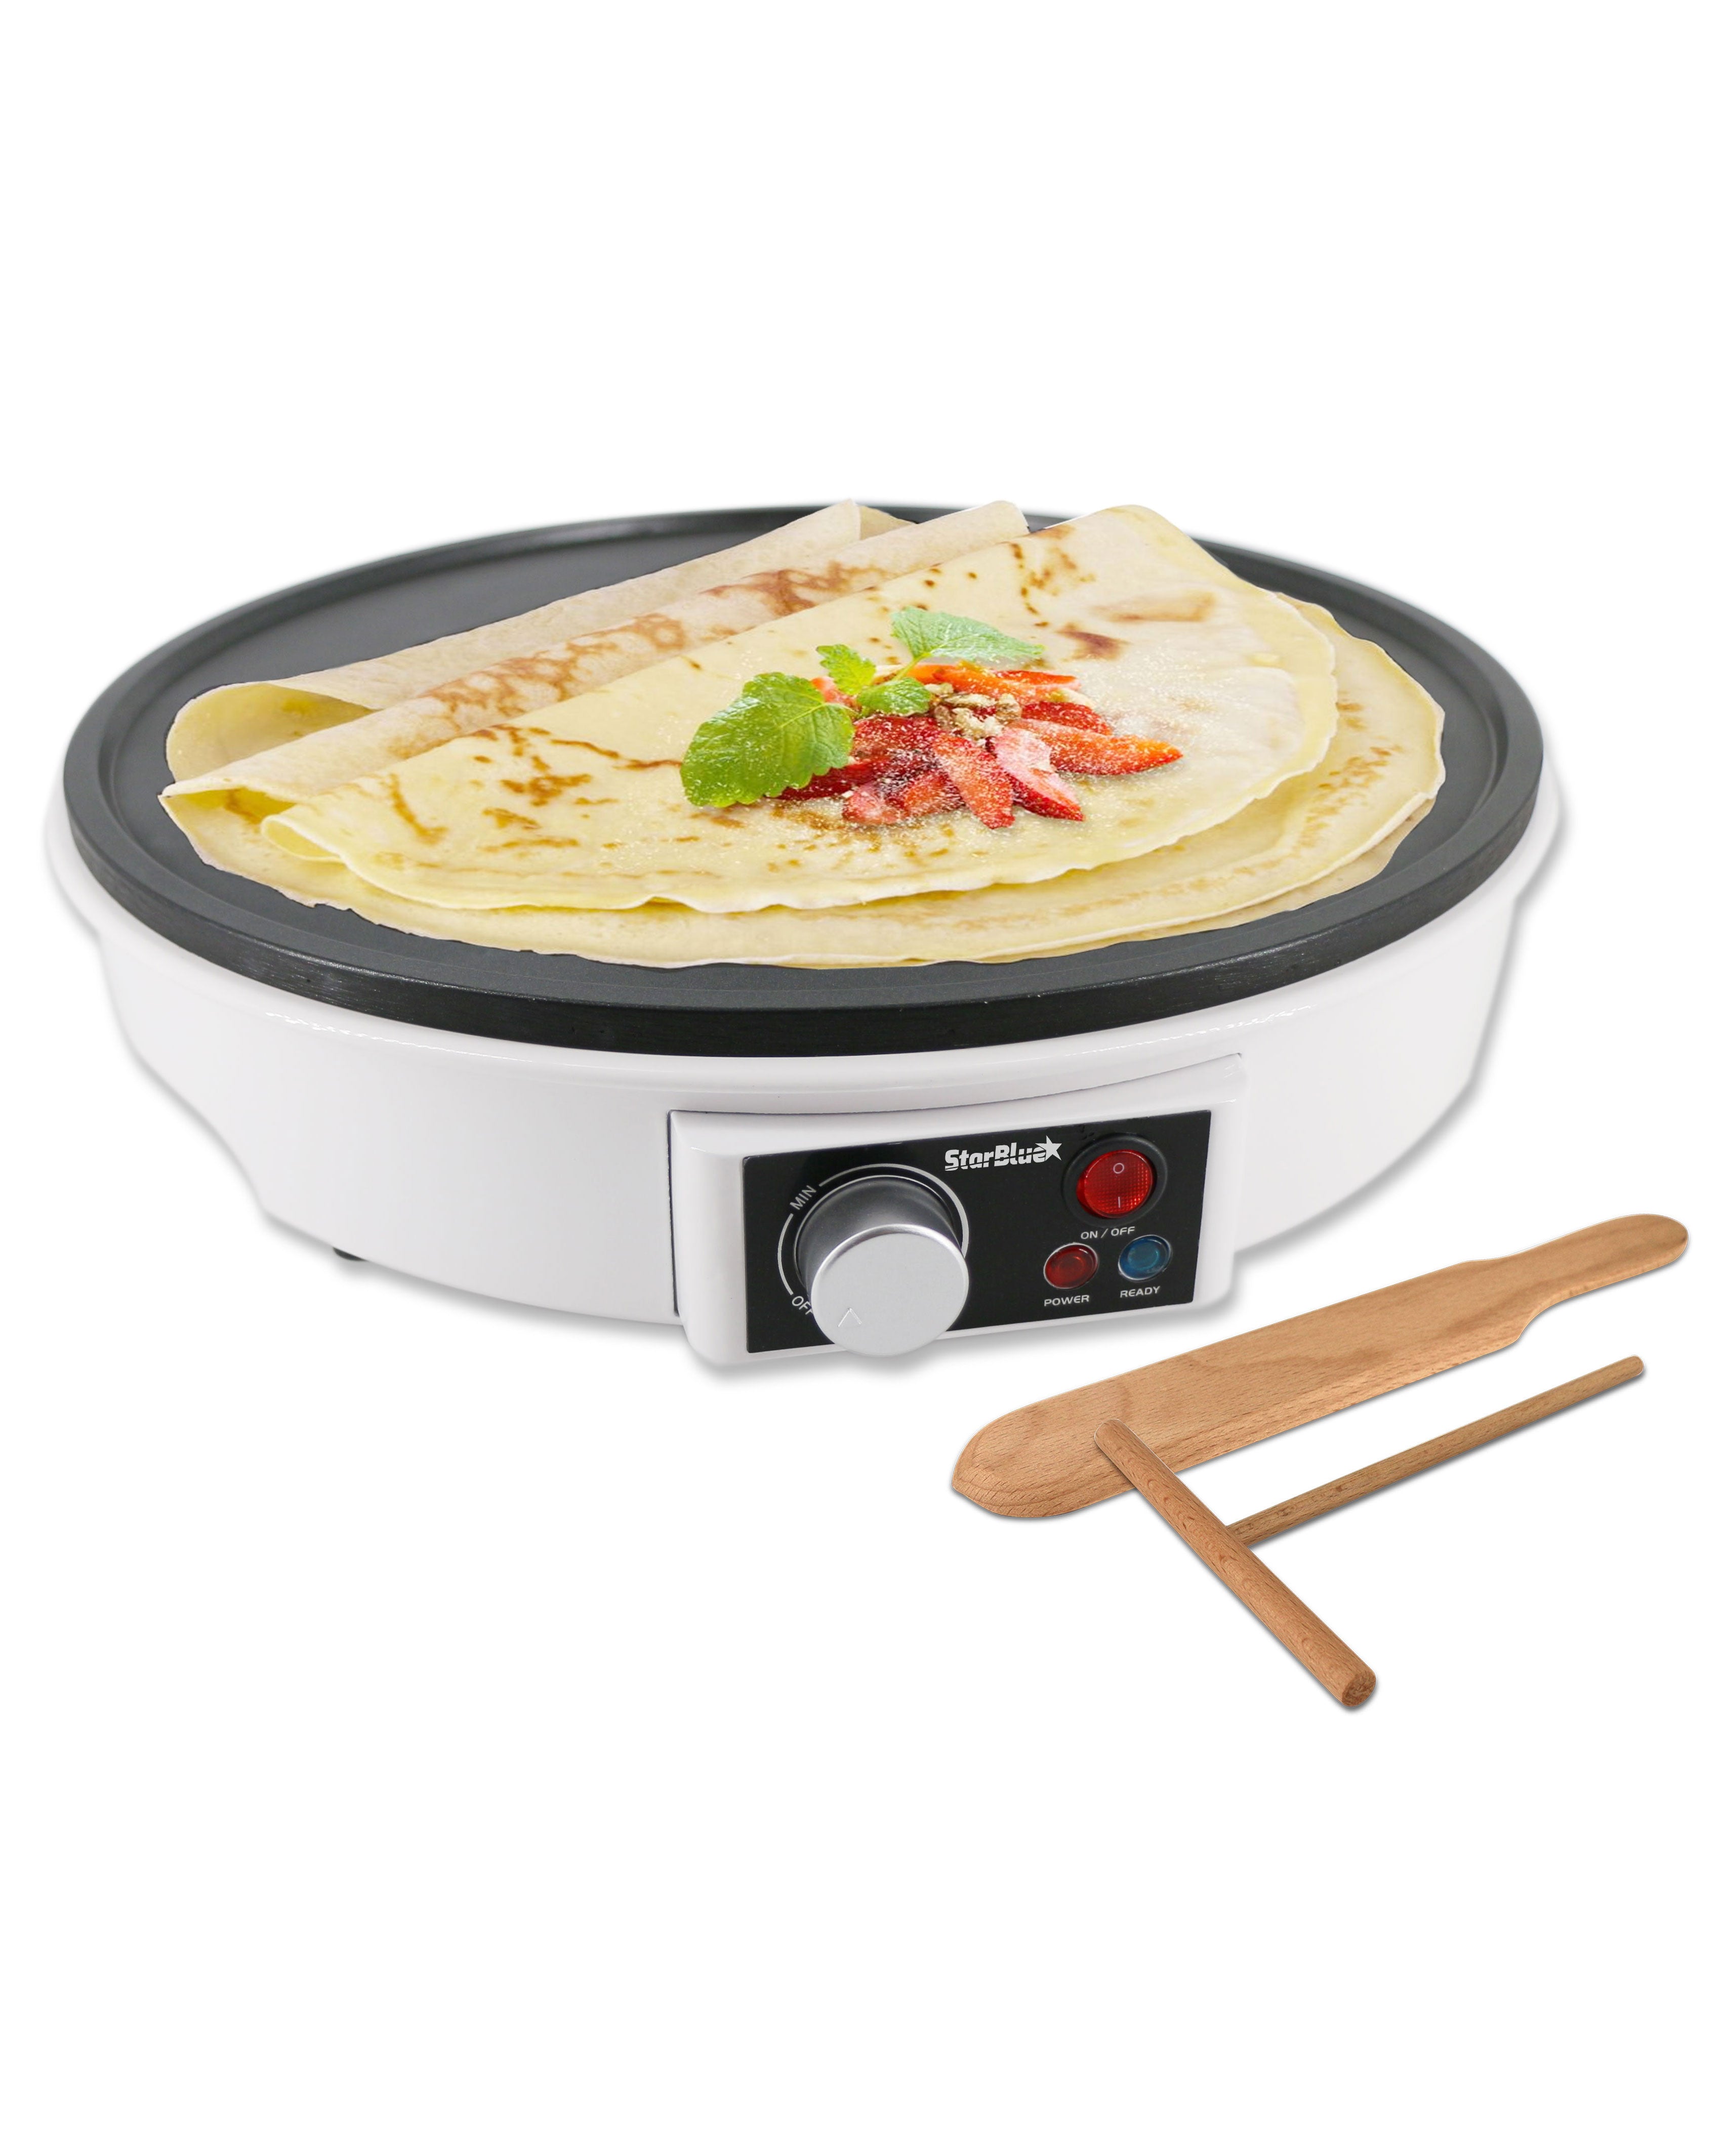 12 inch Electric Crepe Maker by StarBlue with Free Recipes E-Book and Wooden Spatula - Nonstick and Portable Pan, Compact, Easy Clean with On/Off